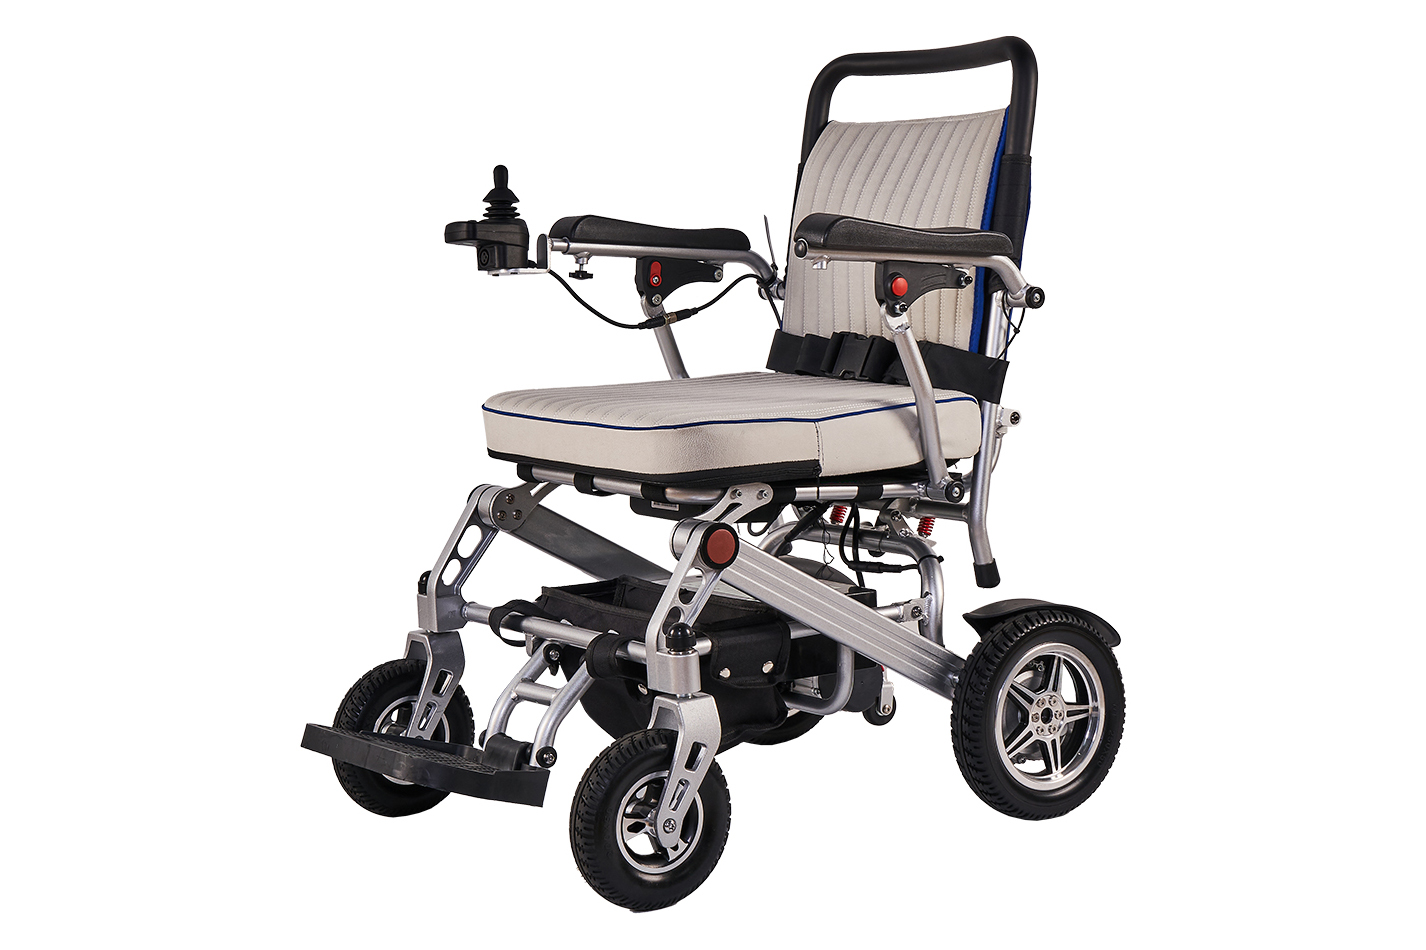 Advantages and application range of lightweight aluminum alloy electric wheelchair